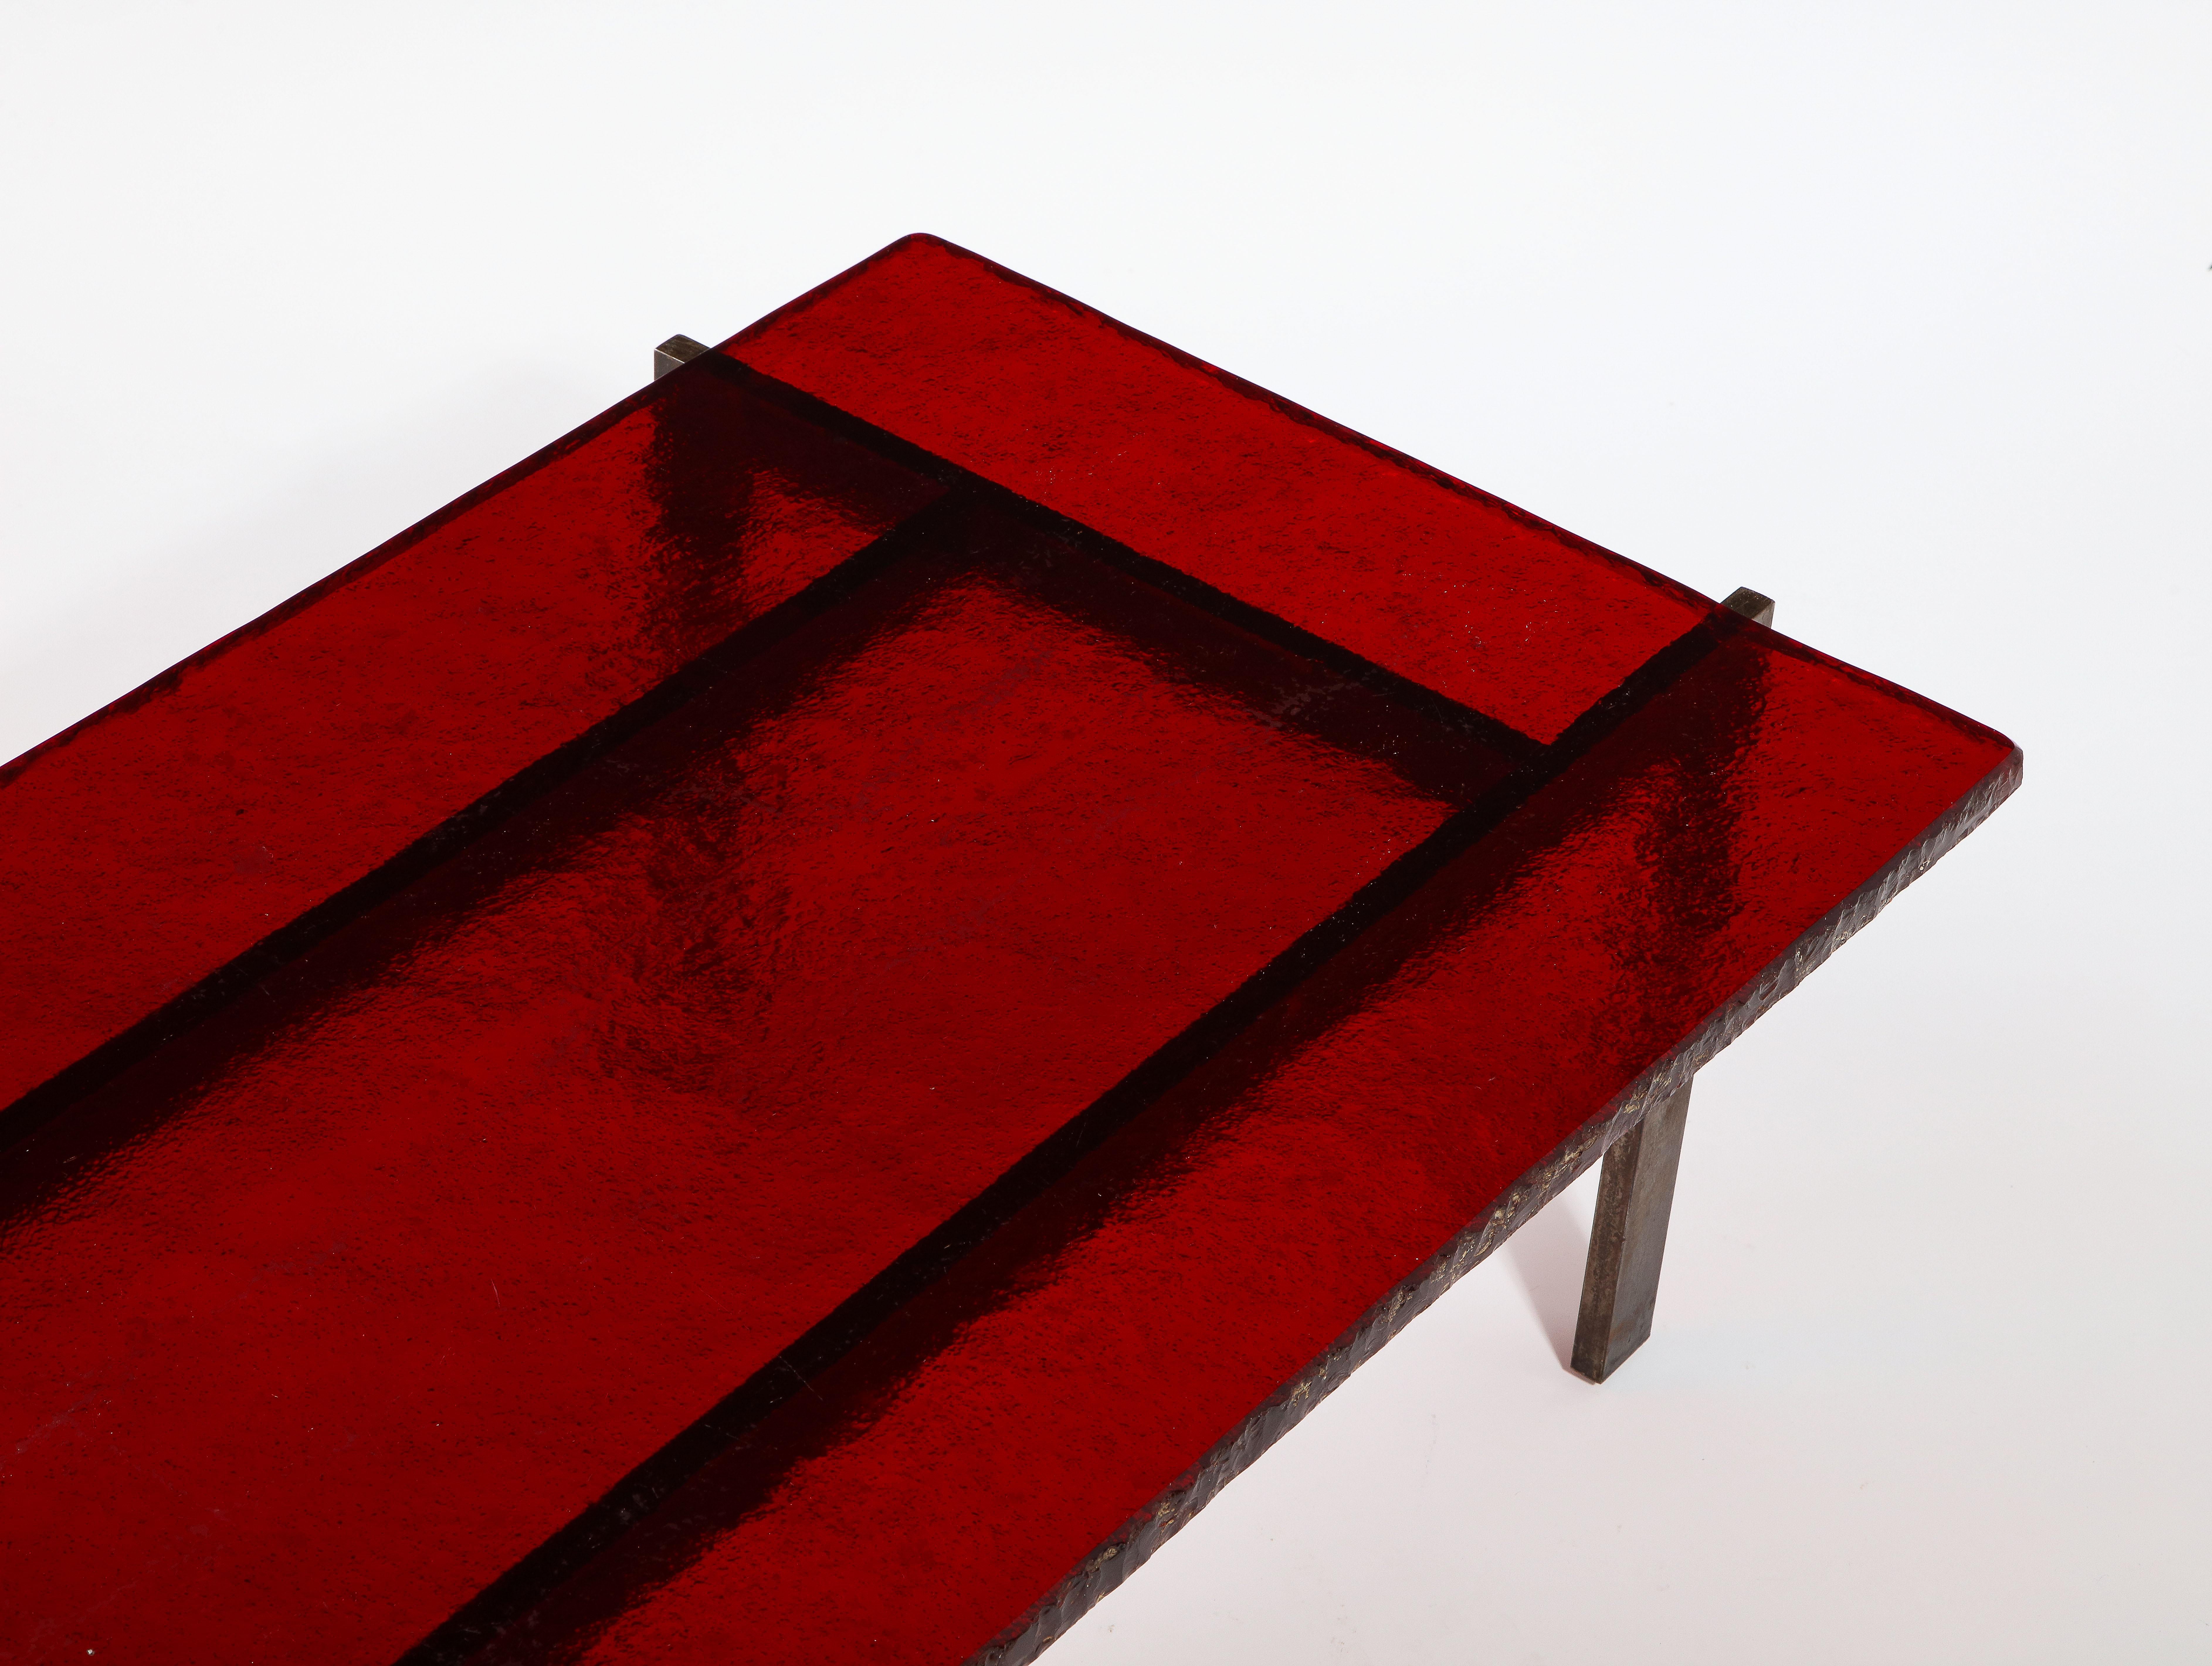 Ruby Red Saint Gobain Glass & Steel Modernist Coffee Table, France 1960's For Sale 2